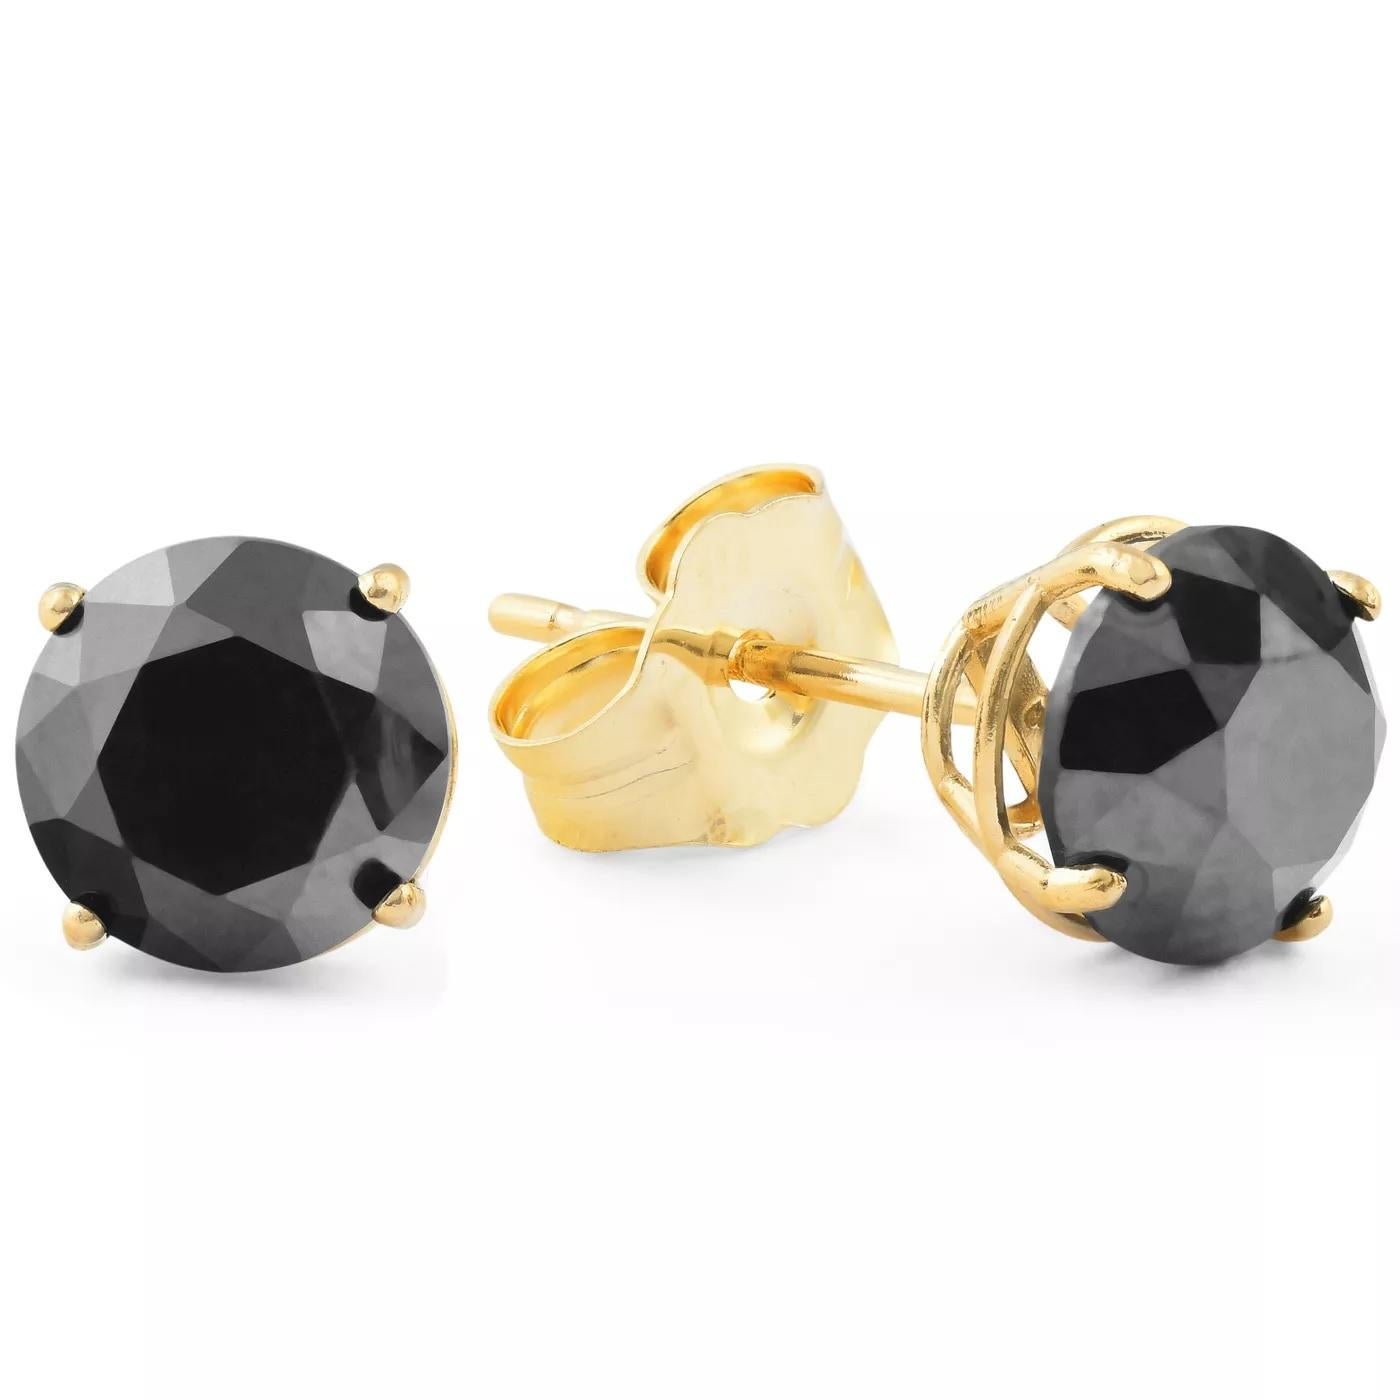 Alluring and refined, these diamond stud earrings are sure to be noticed. Created in 14 K yellow gold, the earring showcases a beguiling 3.03 carat natural black diamond solitaire measuring 8.20 x 8.35 x 6.45mm. Exquisitely made and Captivating with